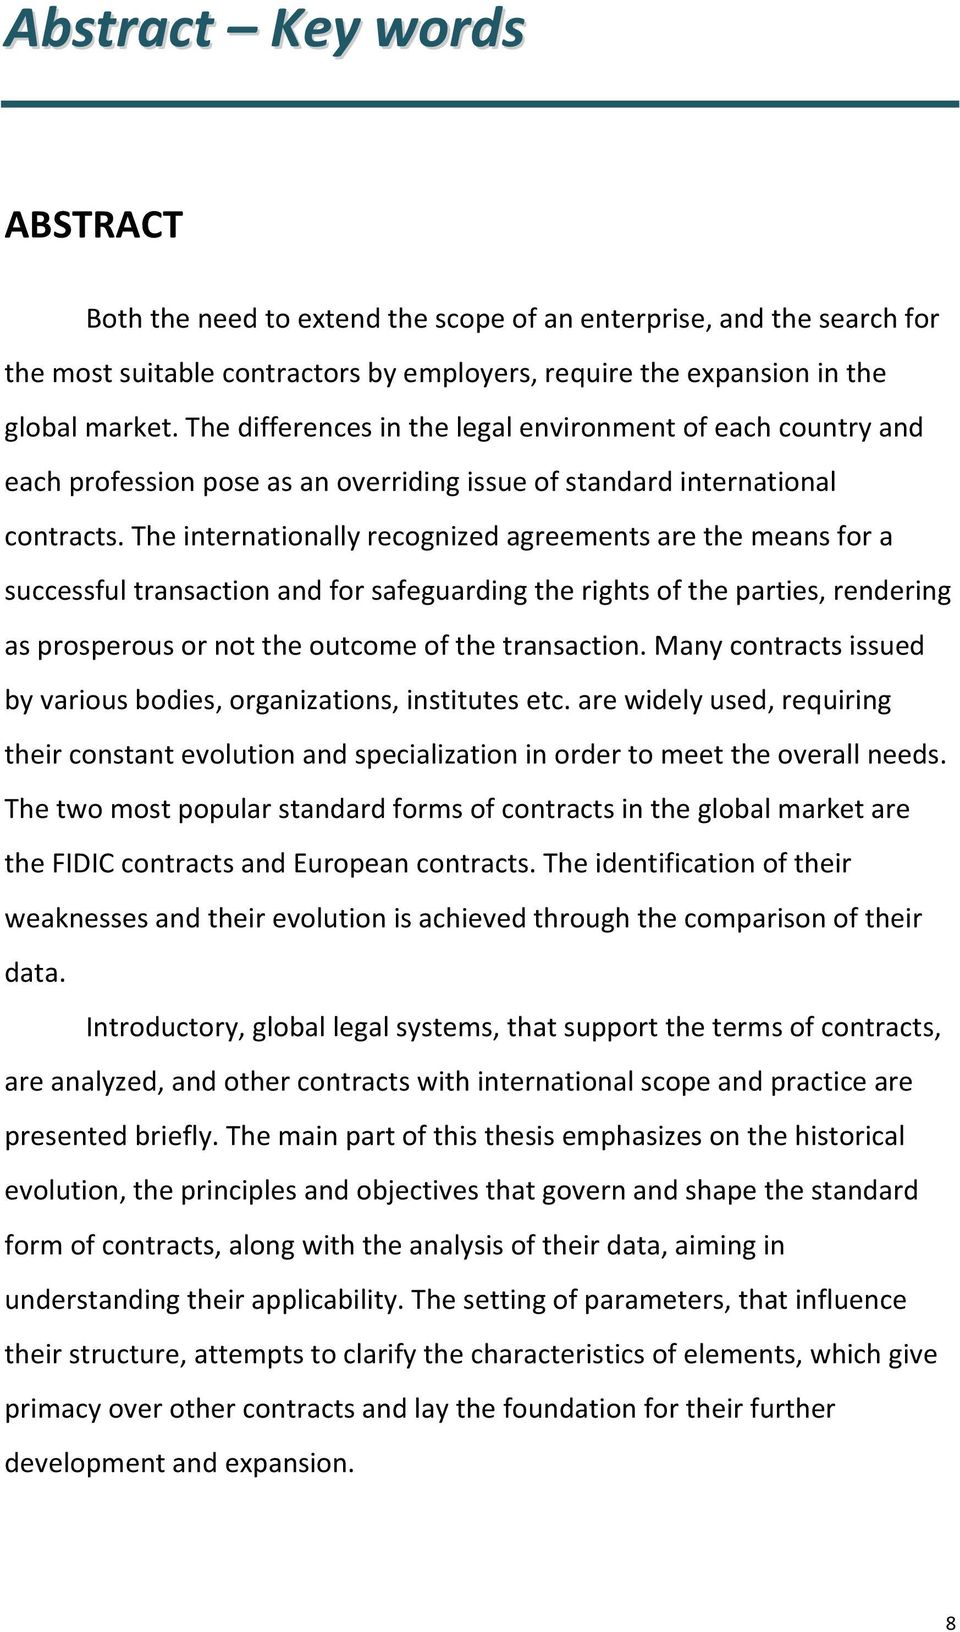 The internationally recognized agreements are the means for a successful transaction and for safeguarding the rights of the parties, rendering as prosperous or not the outcome of the transaction.